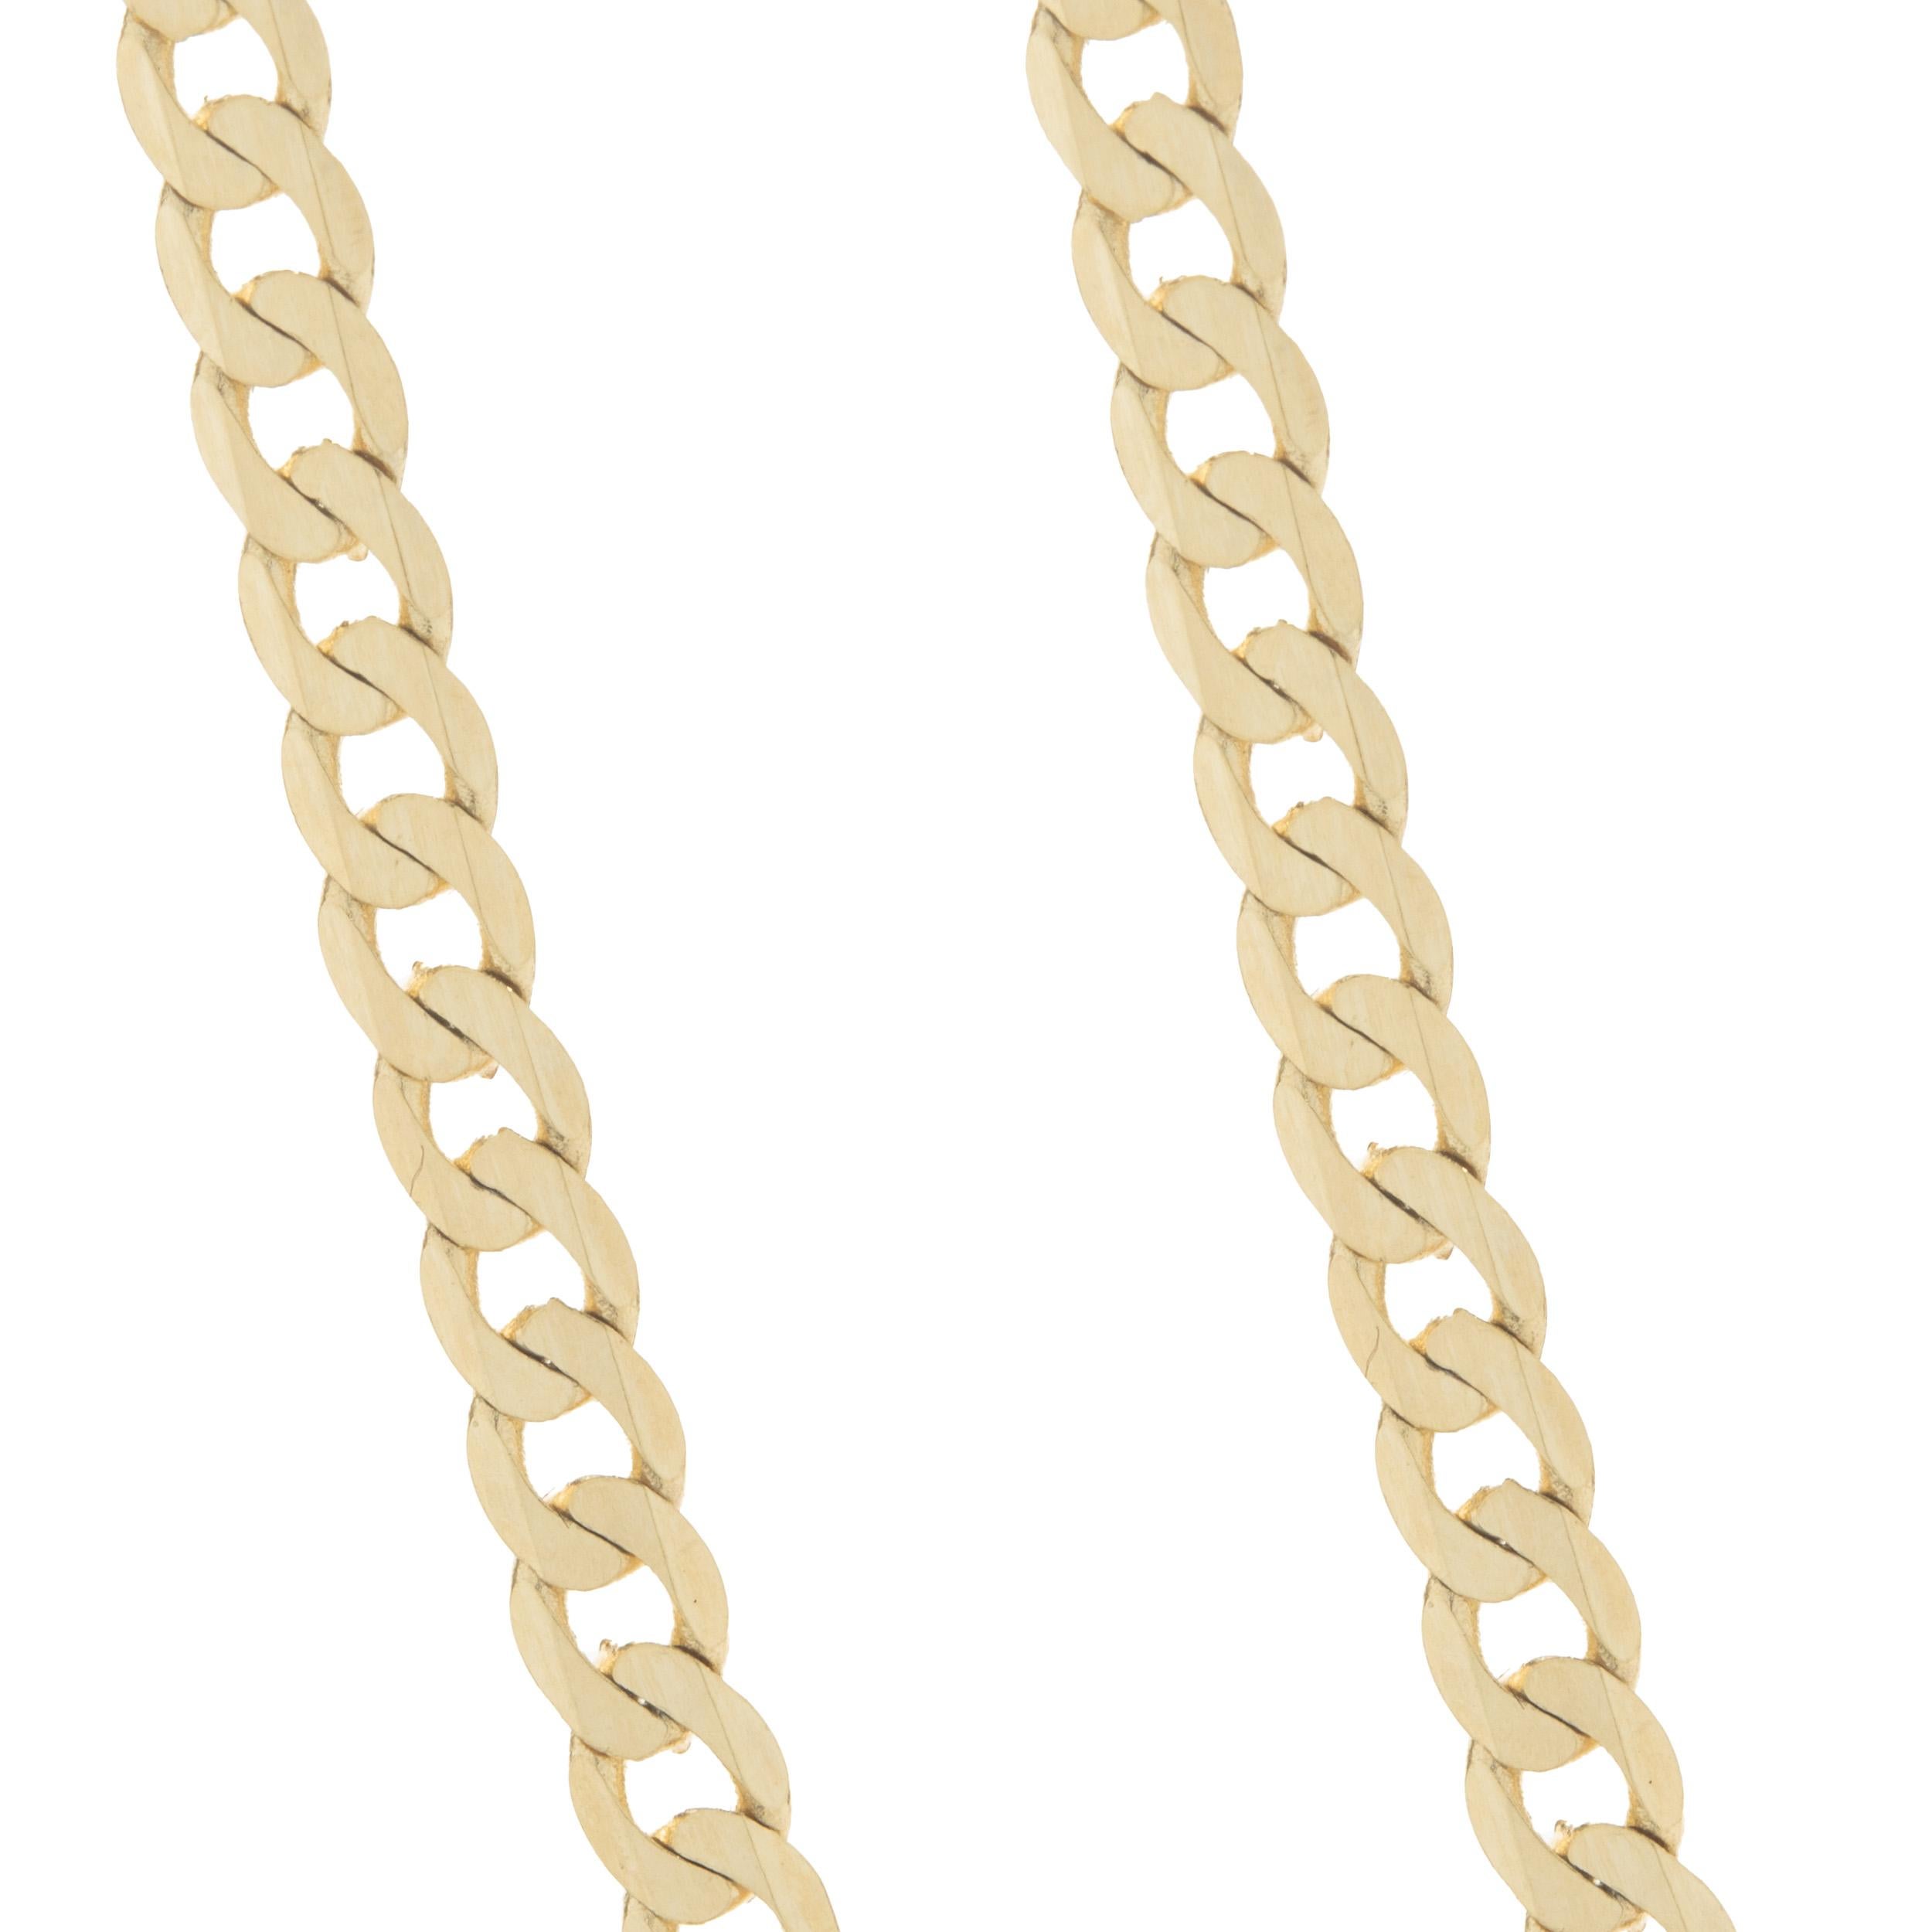 Material: 14K yellow gold
Dimensions: necklace measures 20-inches in length
Weight: 8.88 grams